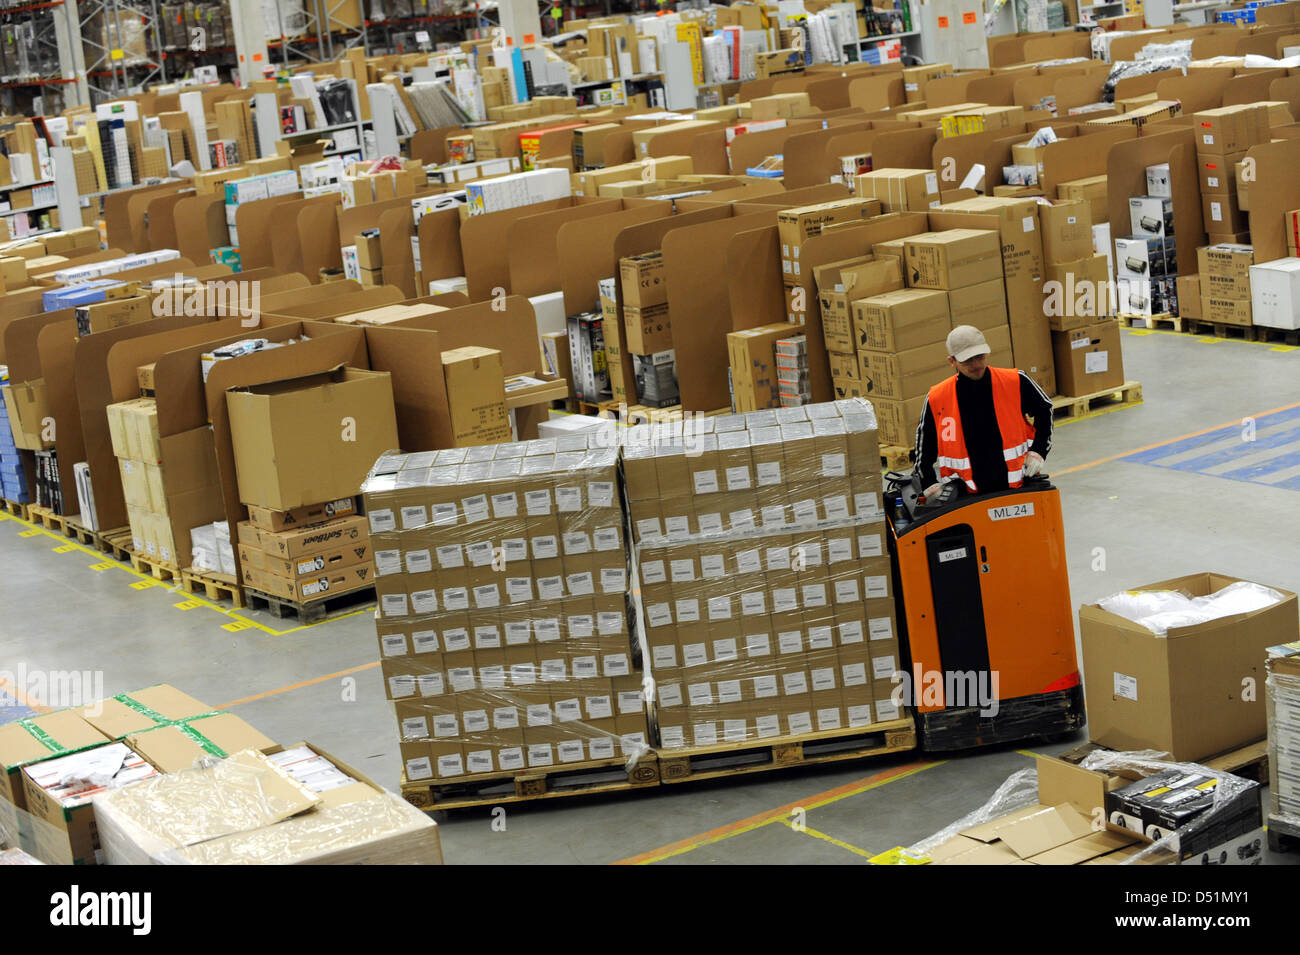 Amazon Shipping High Resolution Stock Photography and Images - Alamy